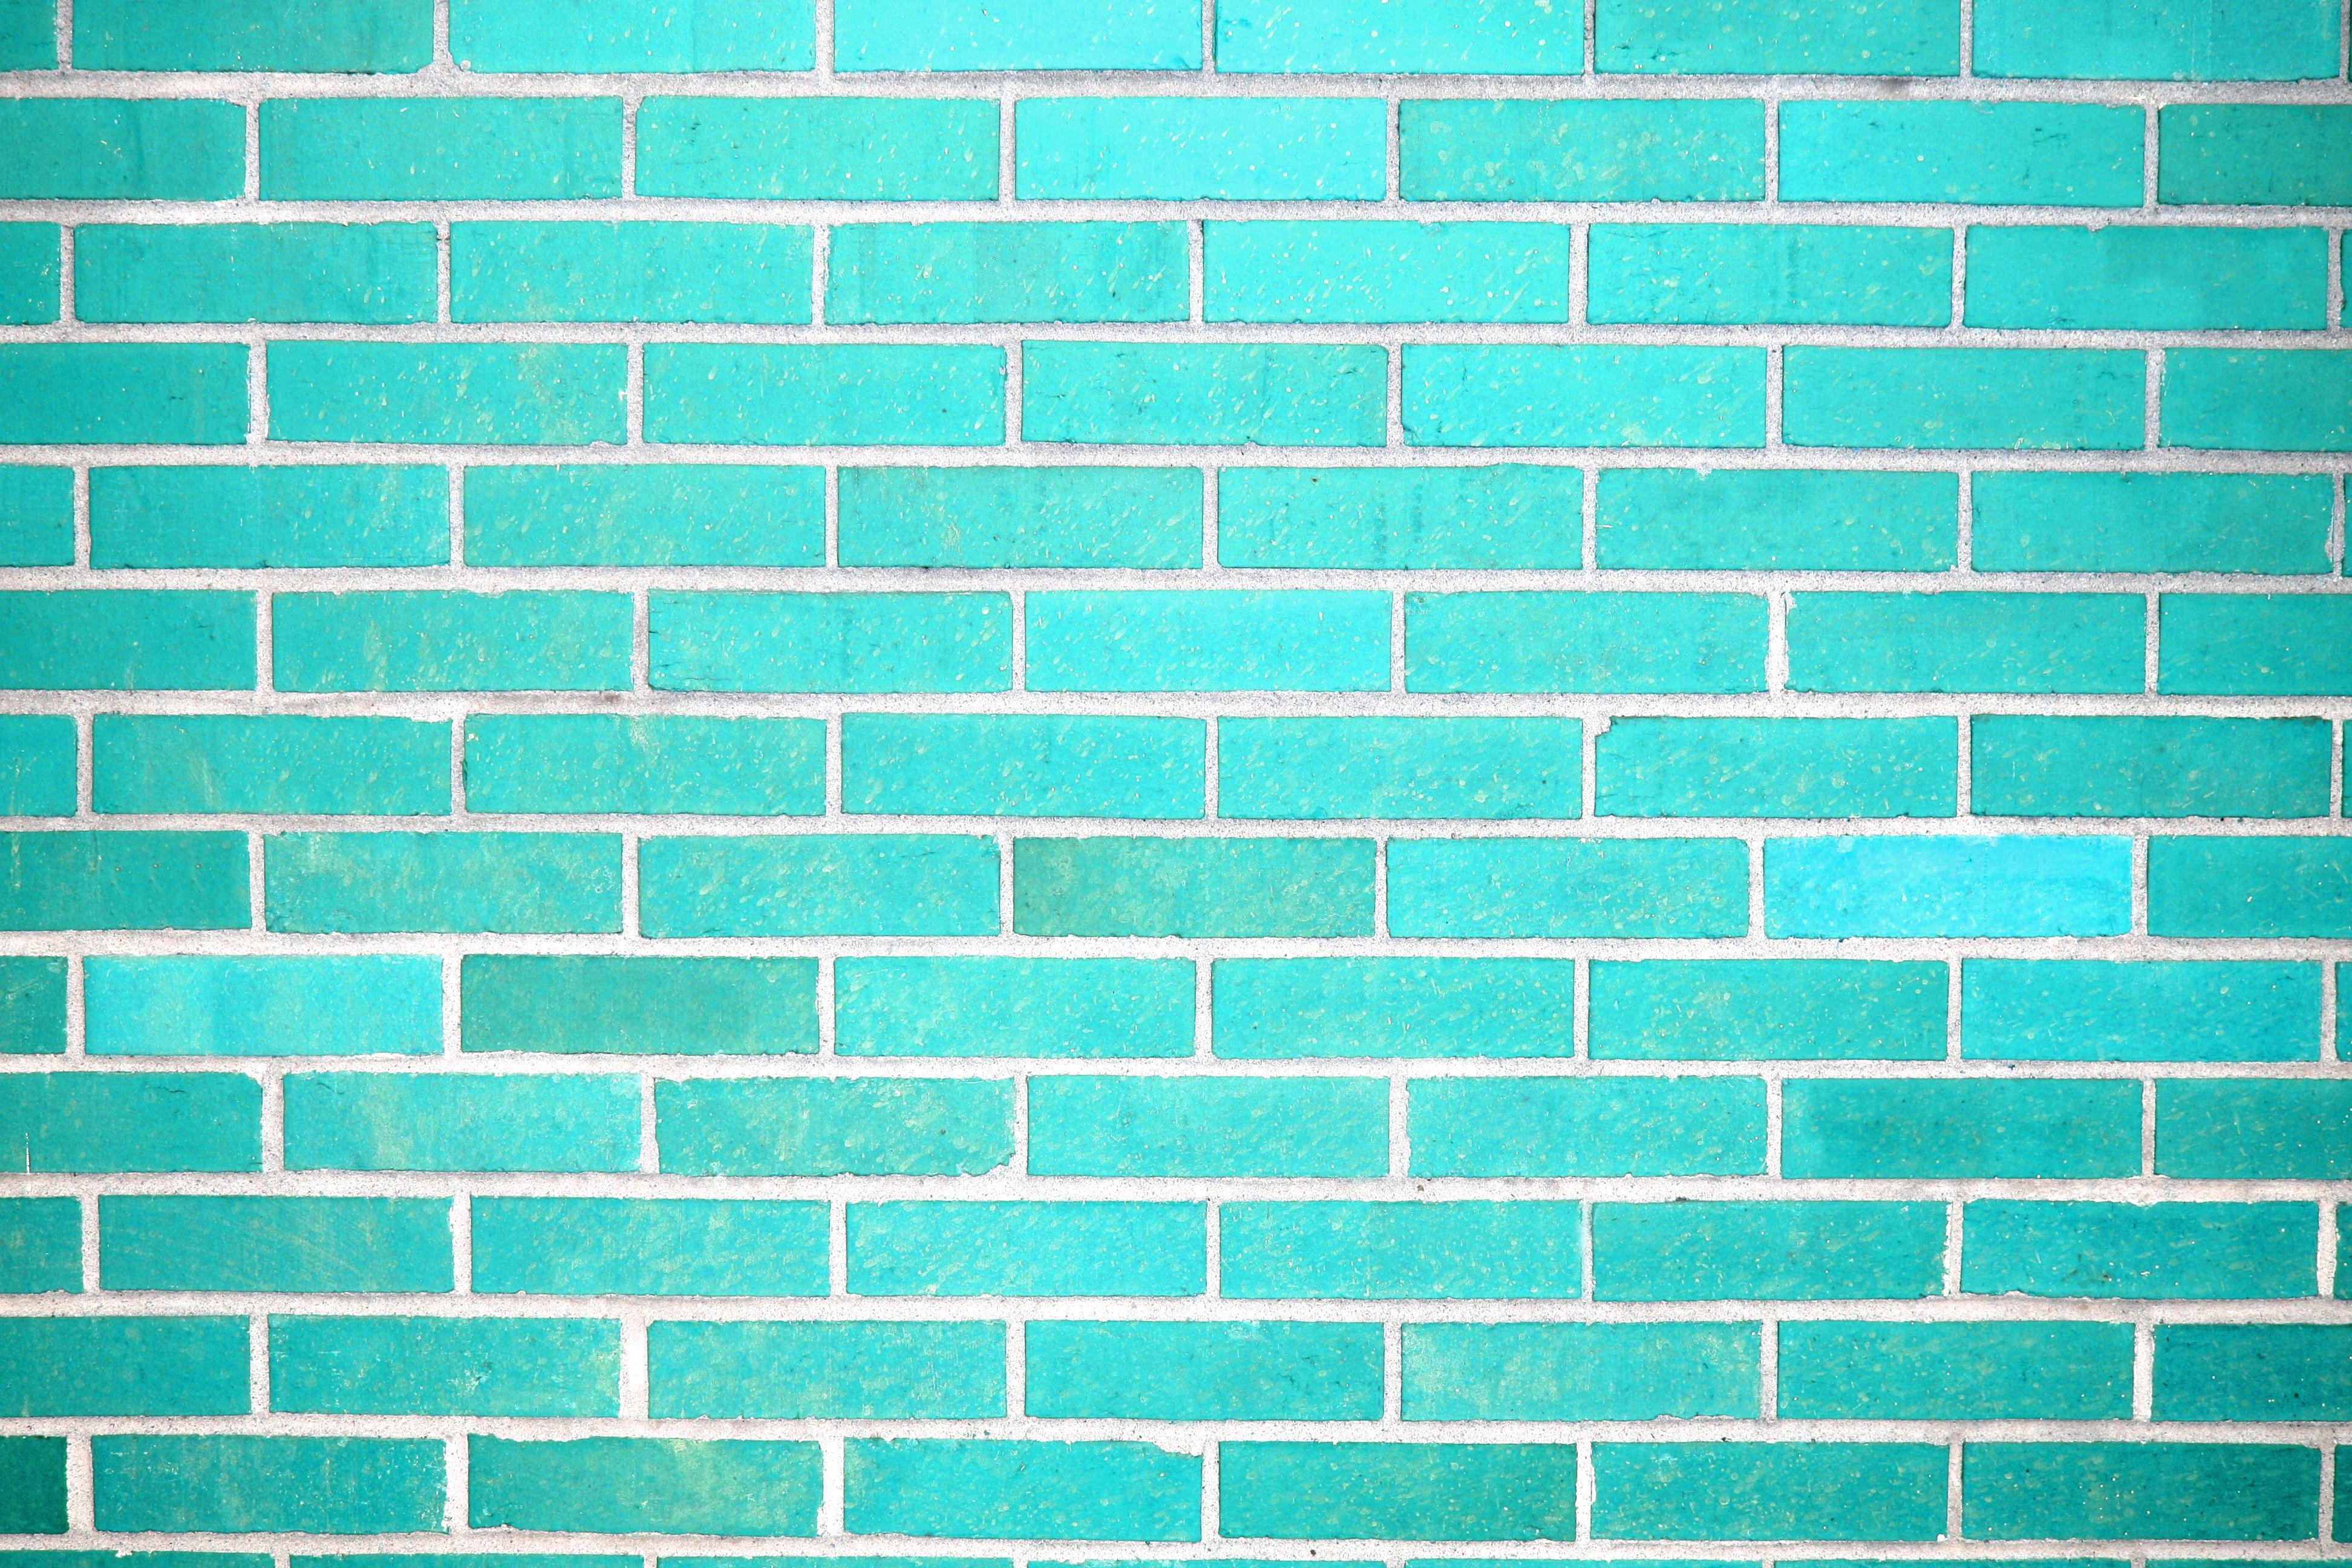 Teal Brick Wall Texture Picture Photograph Photos Public